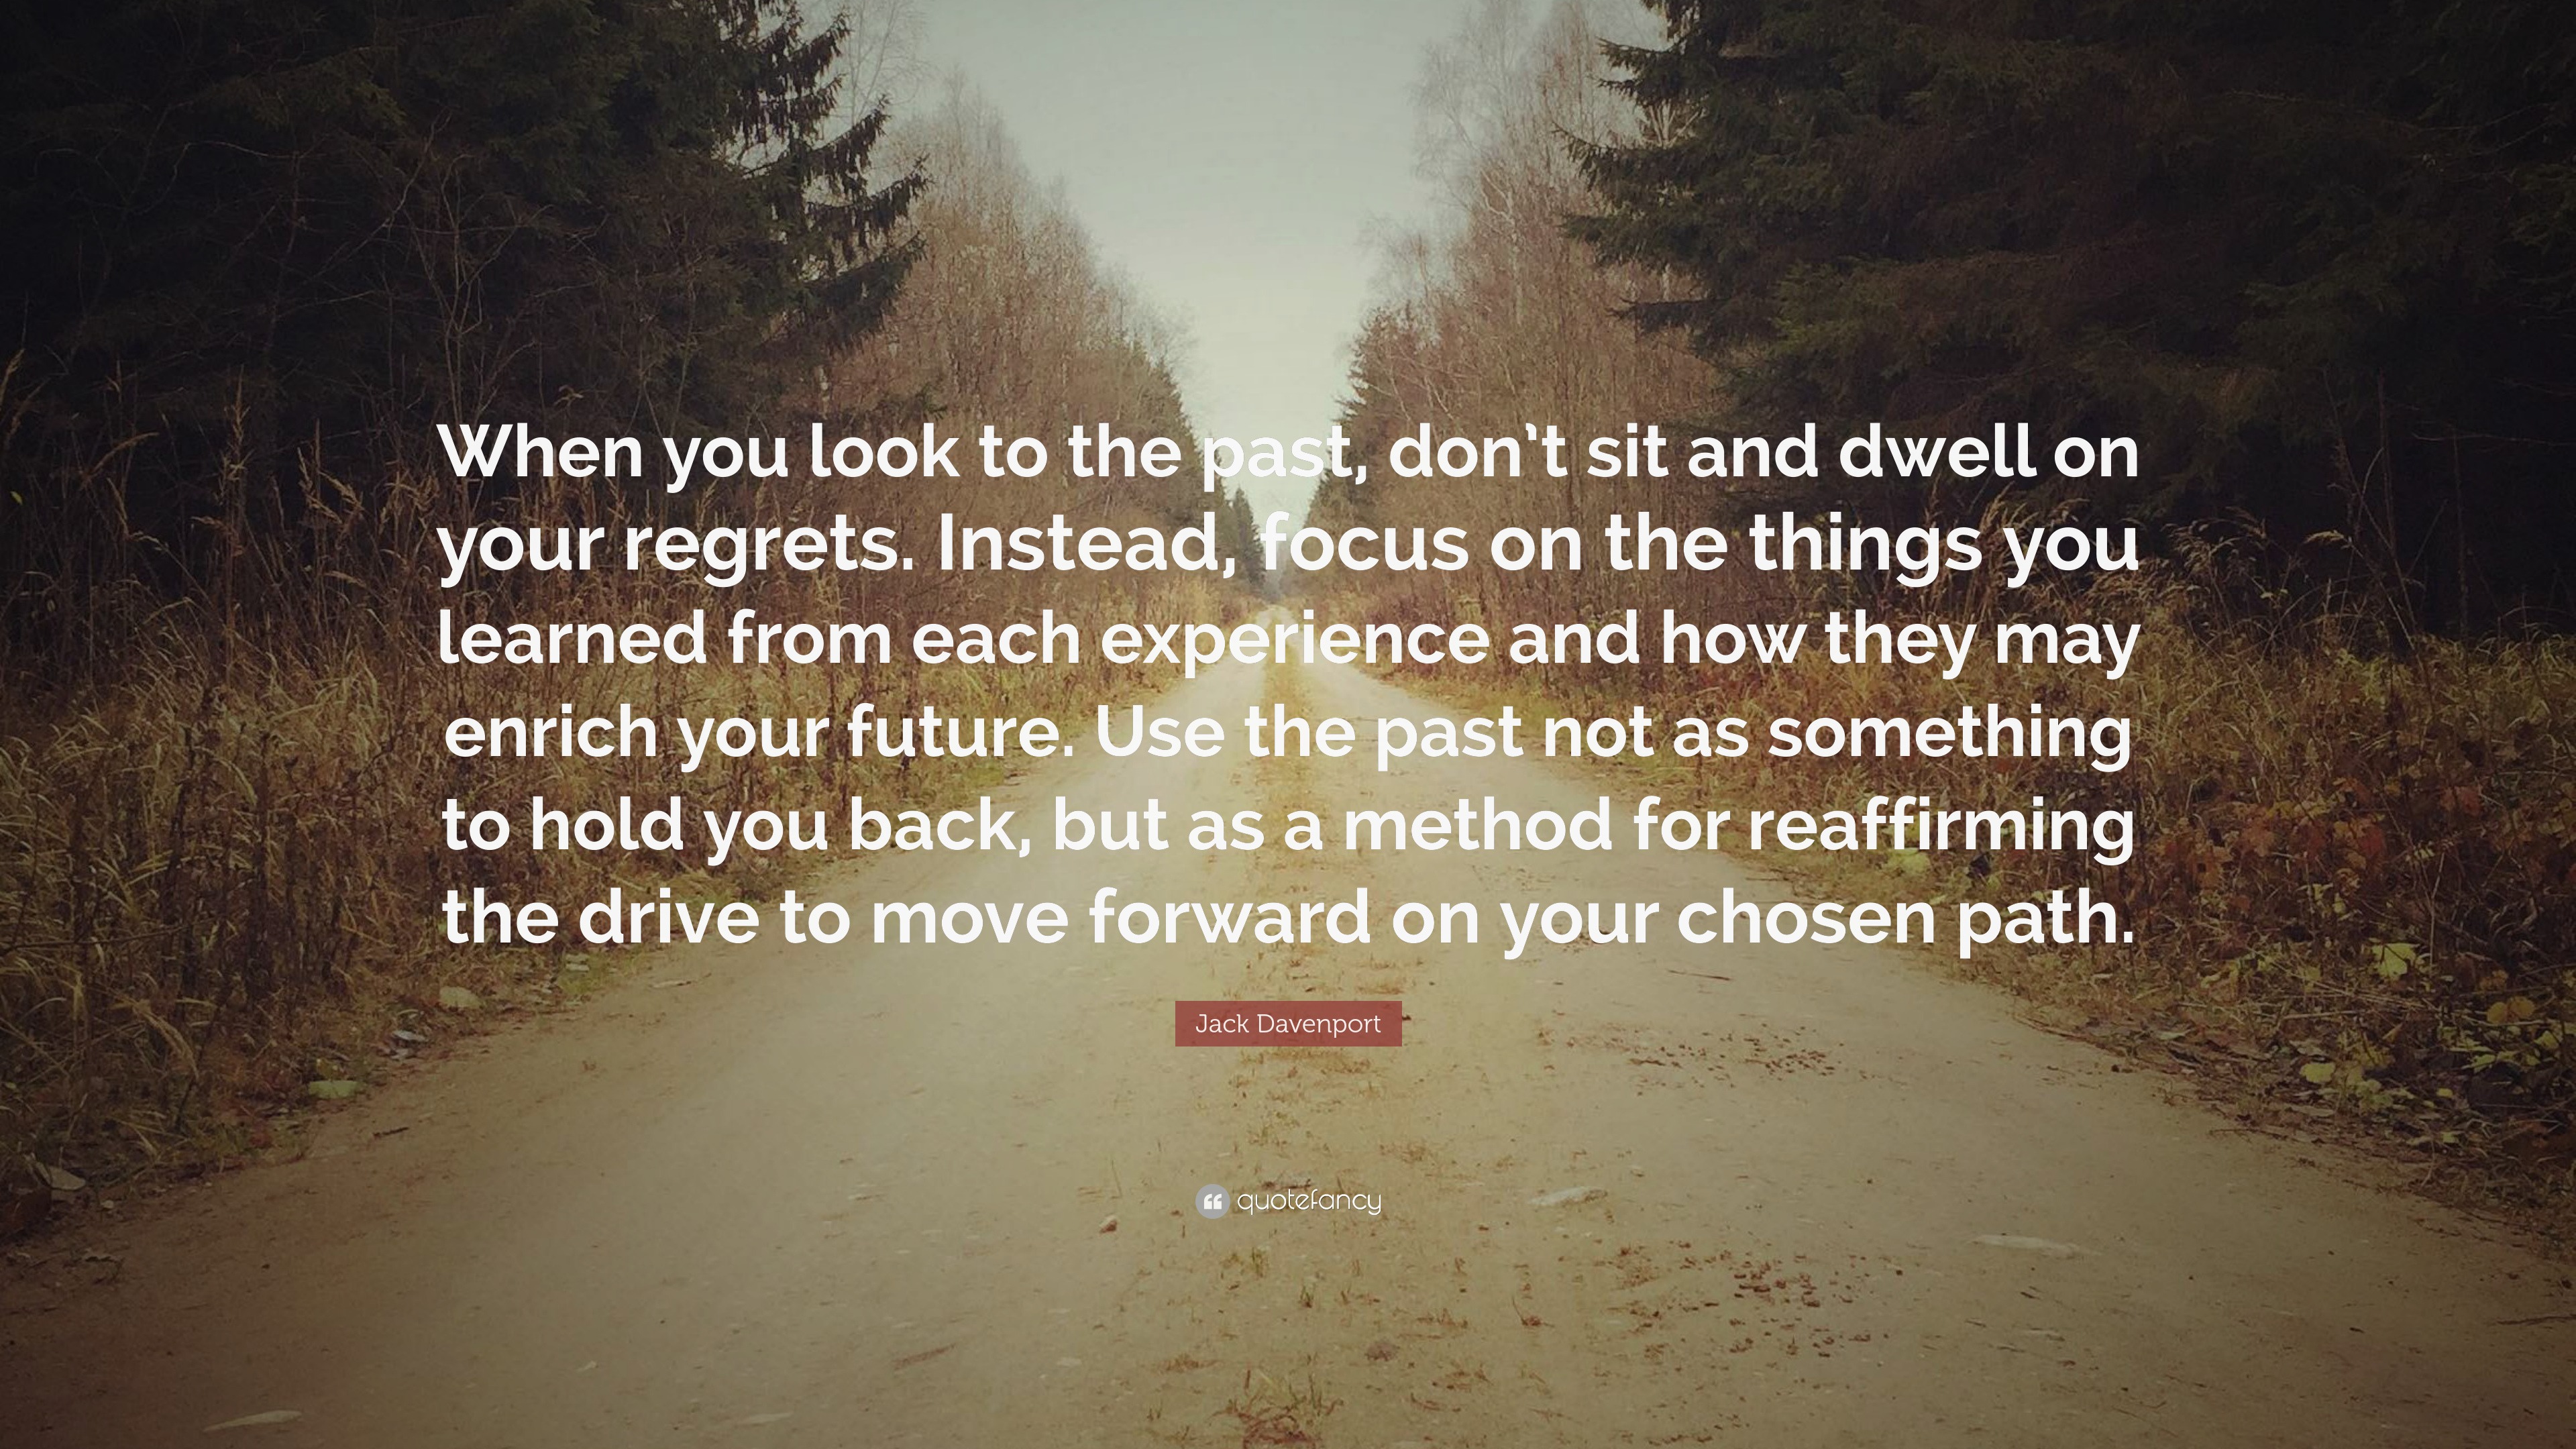 Jack Davenport Quote: “When you look to the past, don’t sit and dwell ...